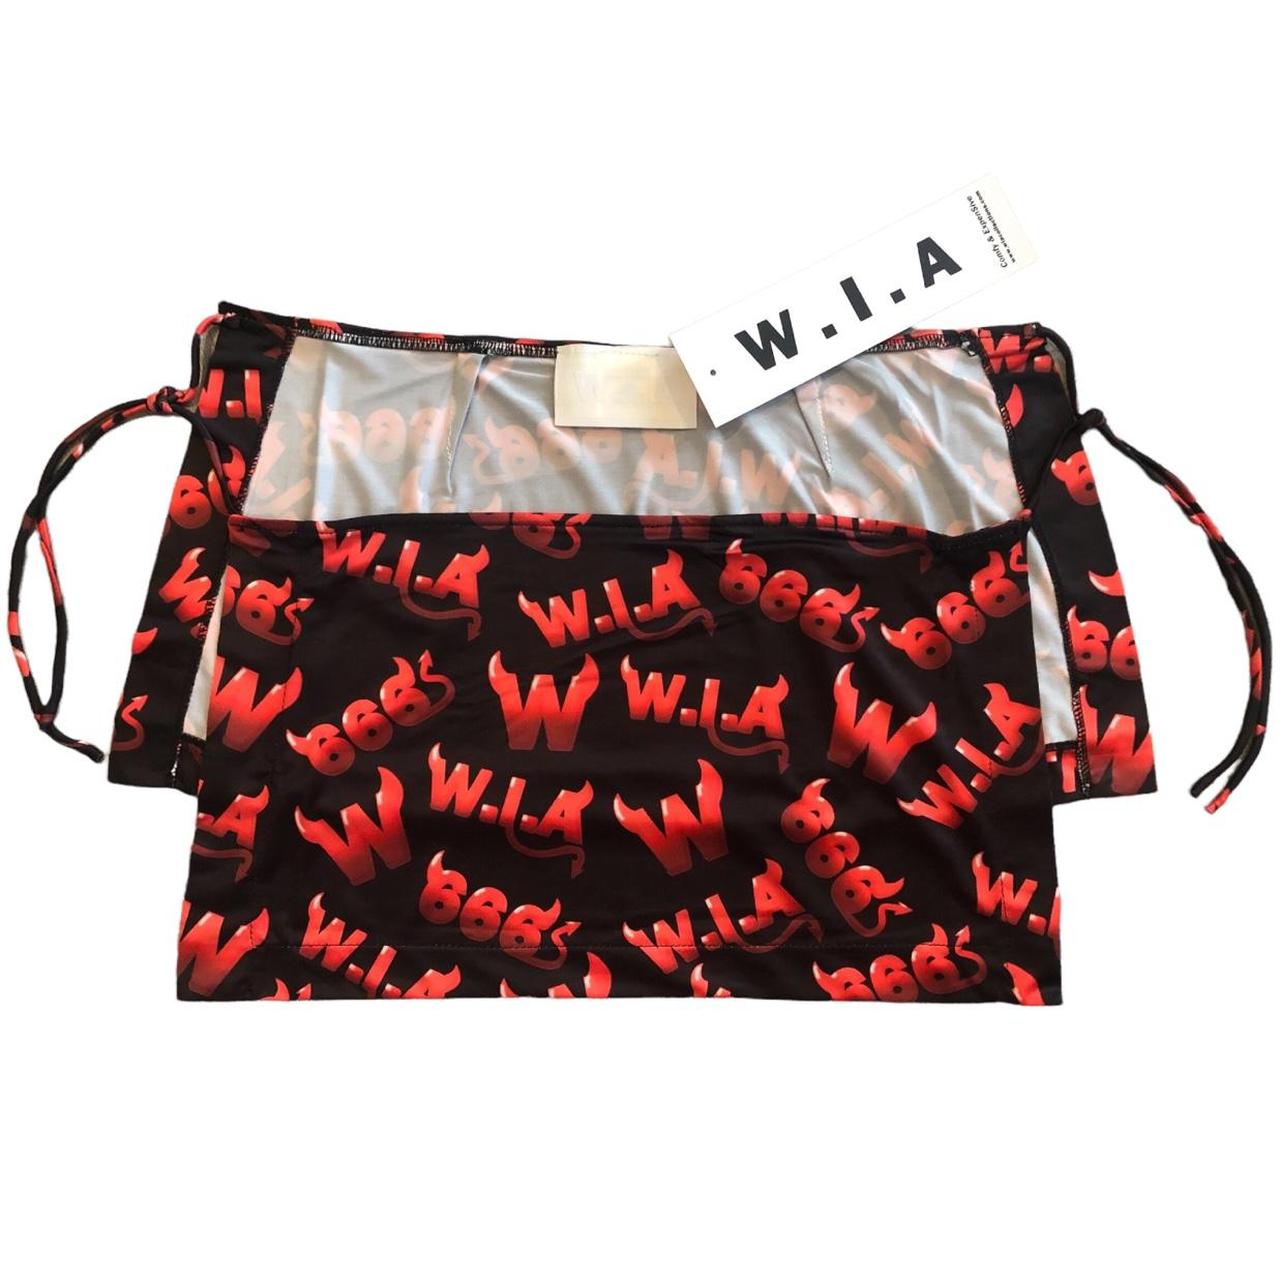 Product Image 4 - W.I.A Devil Open Sides Micro